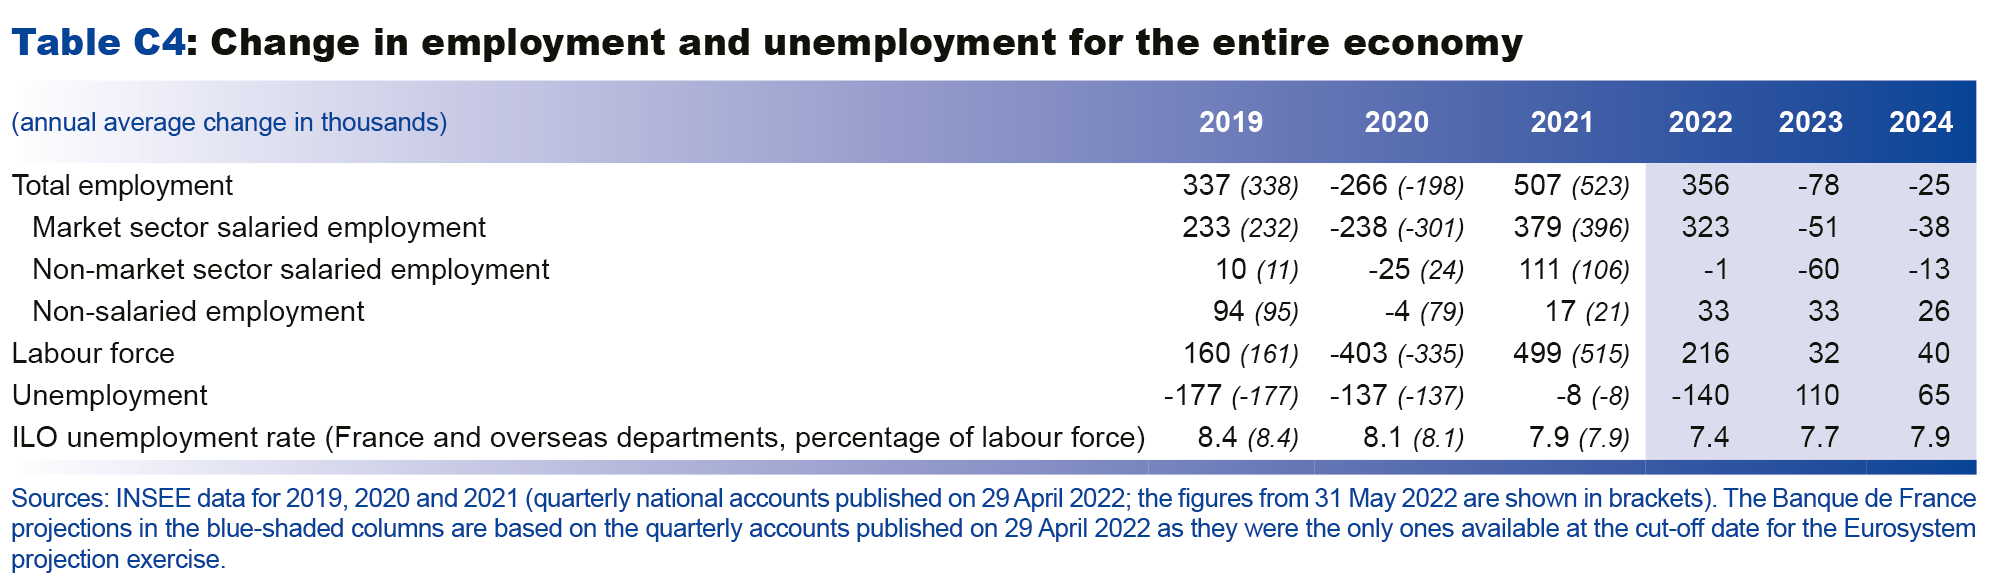 Macroeconomic projections – June 2022 - Change in empoyment and unemployment for the entire economy